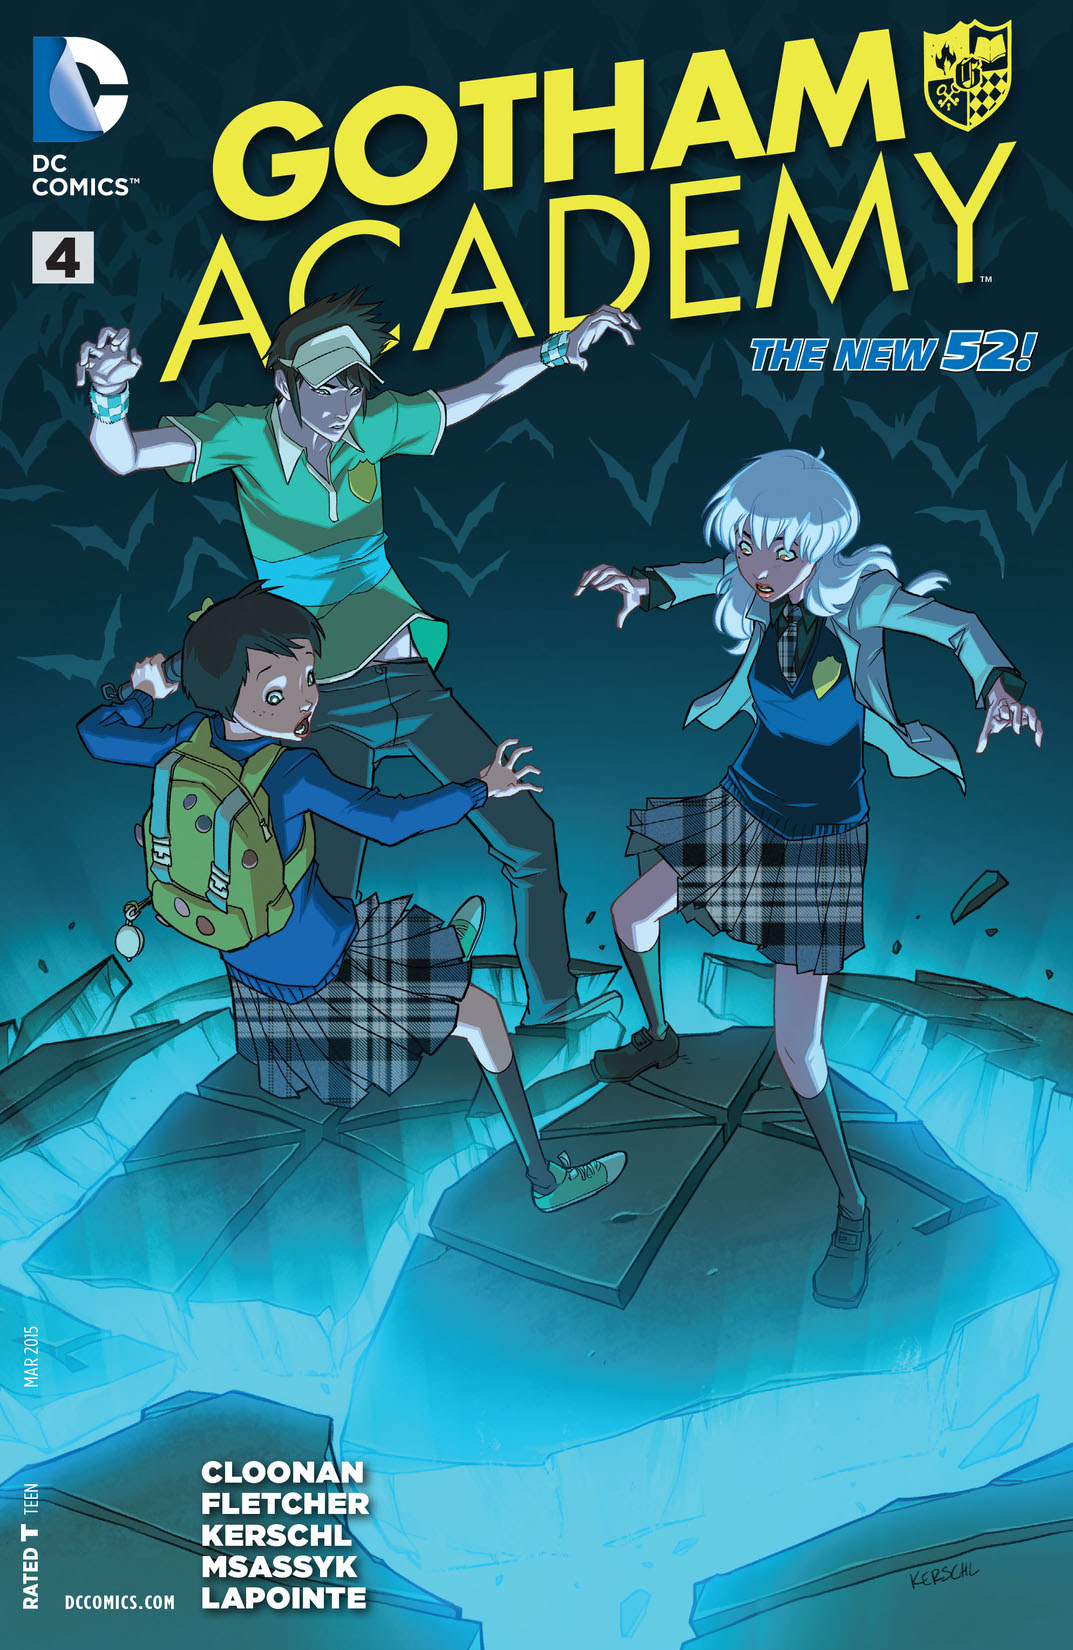 Gotham Academy #4 preview images